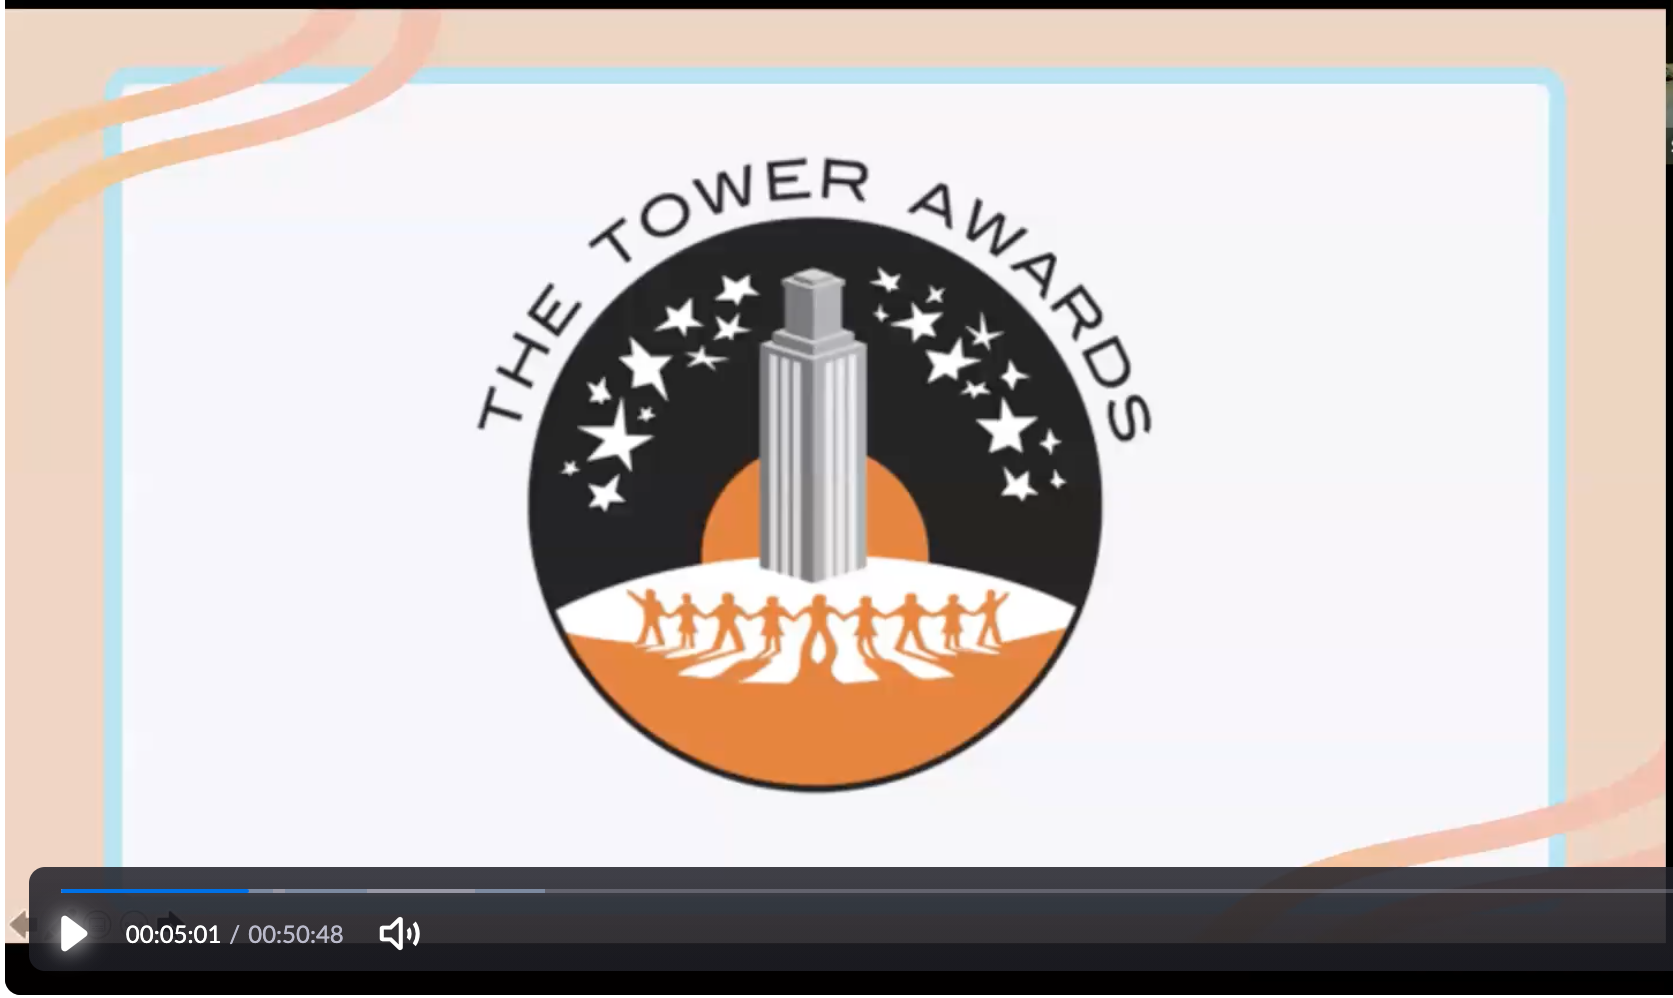 Tower Awards video recording